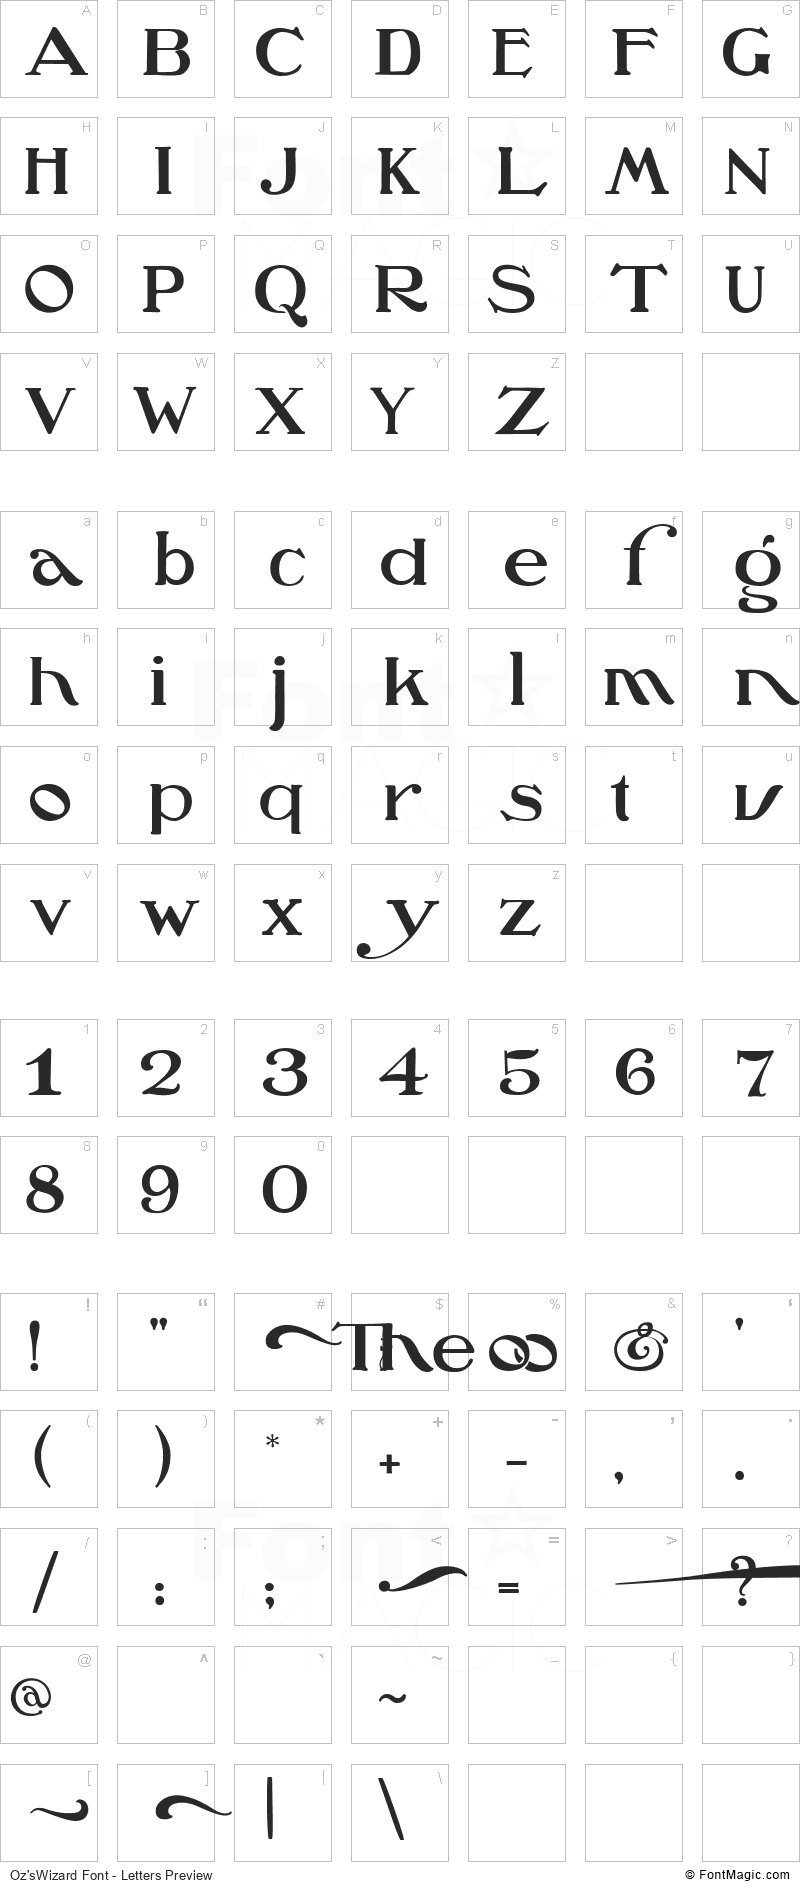 Oz’sWizard Font - All Latters Preview Chart